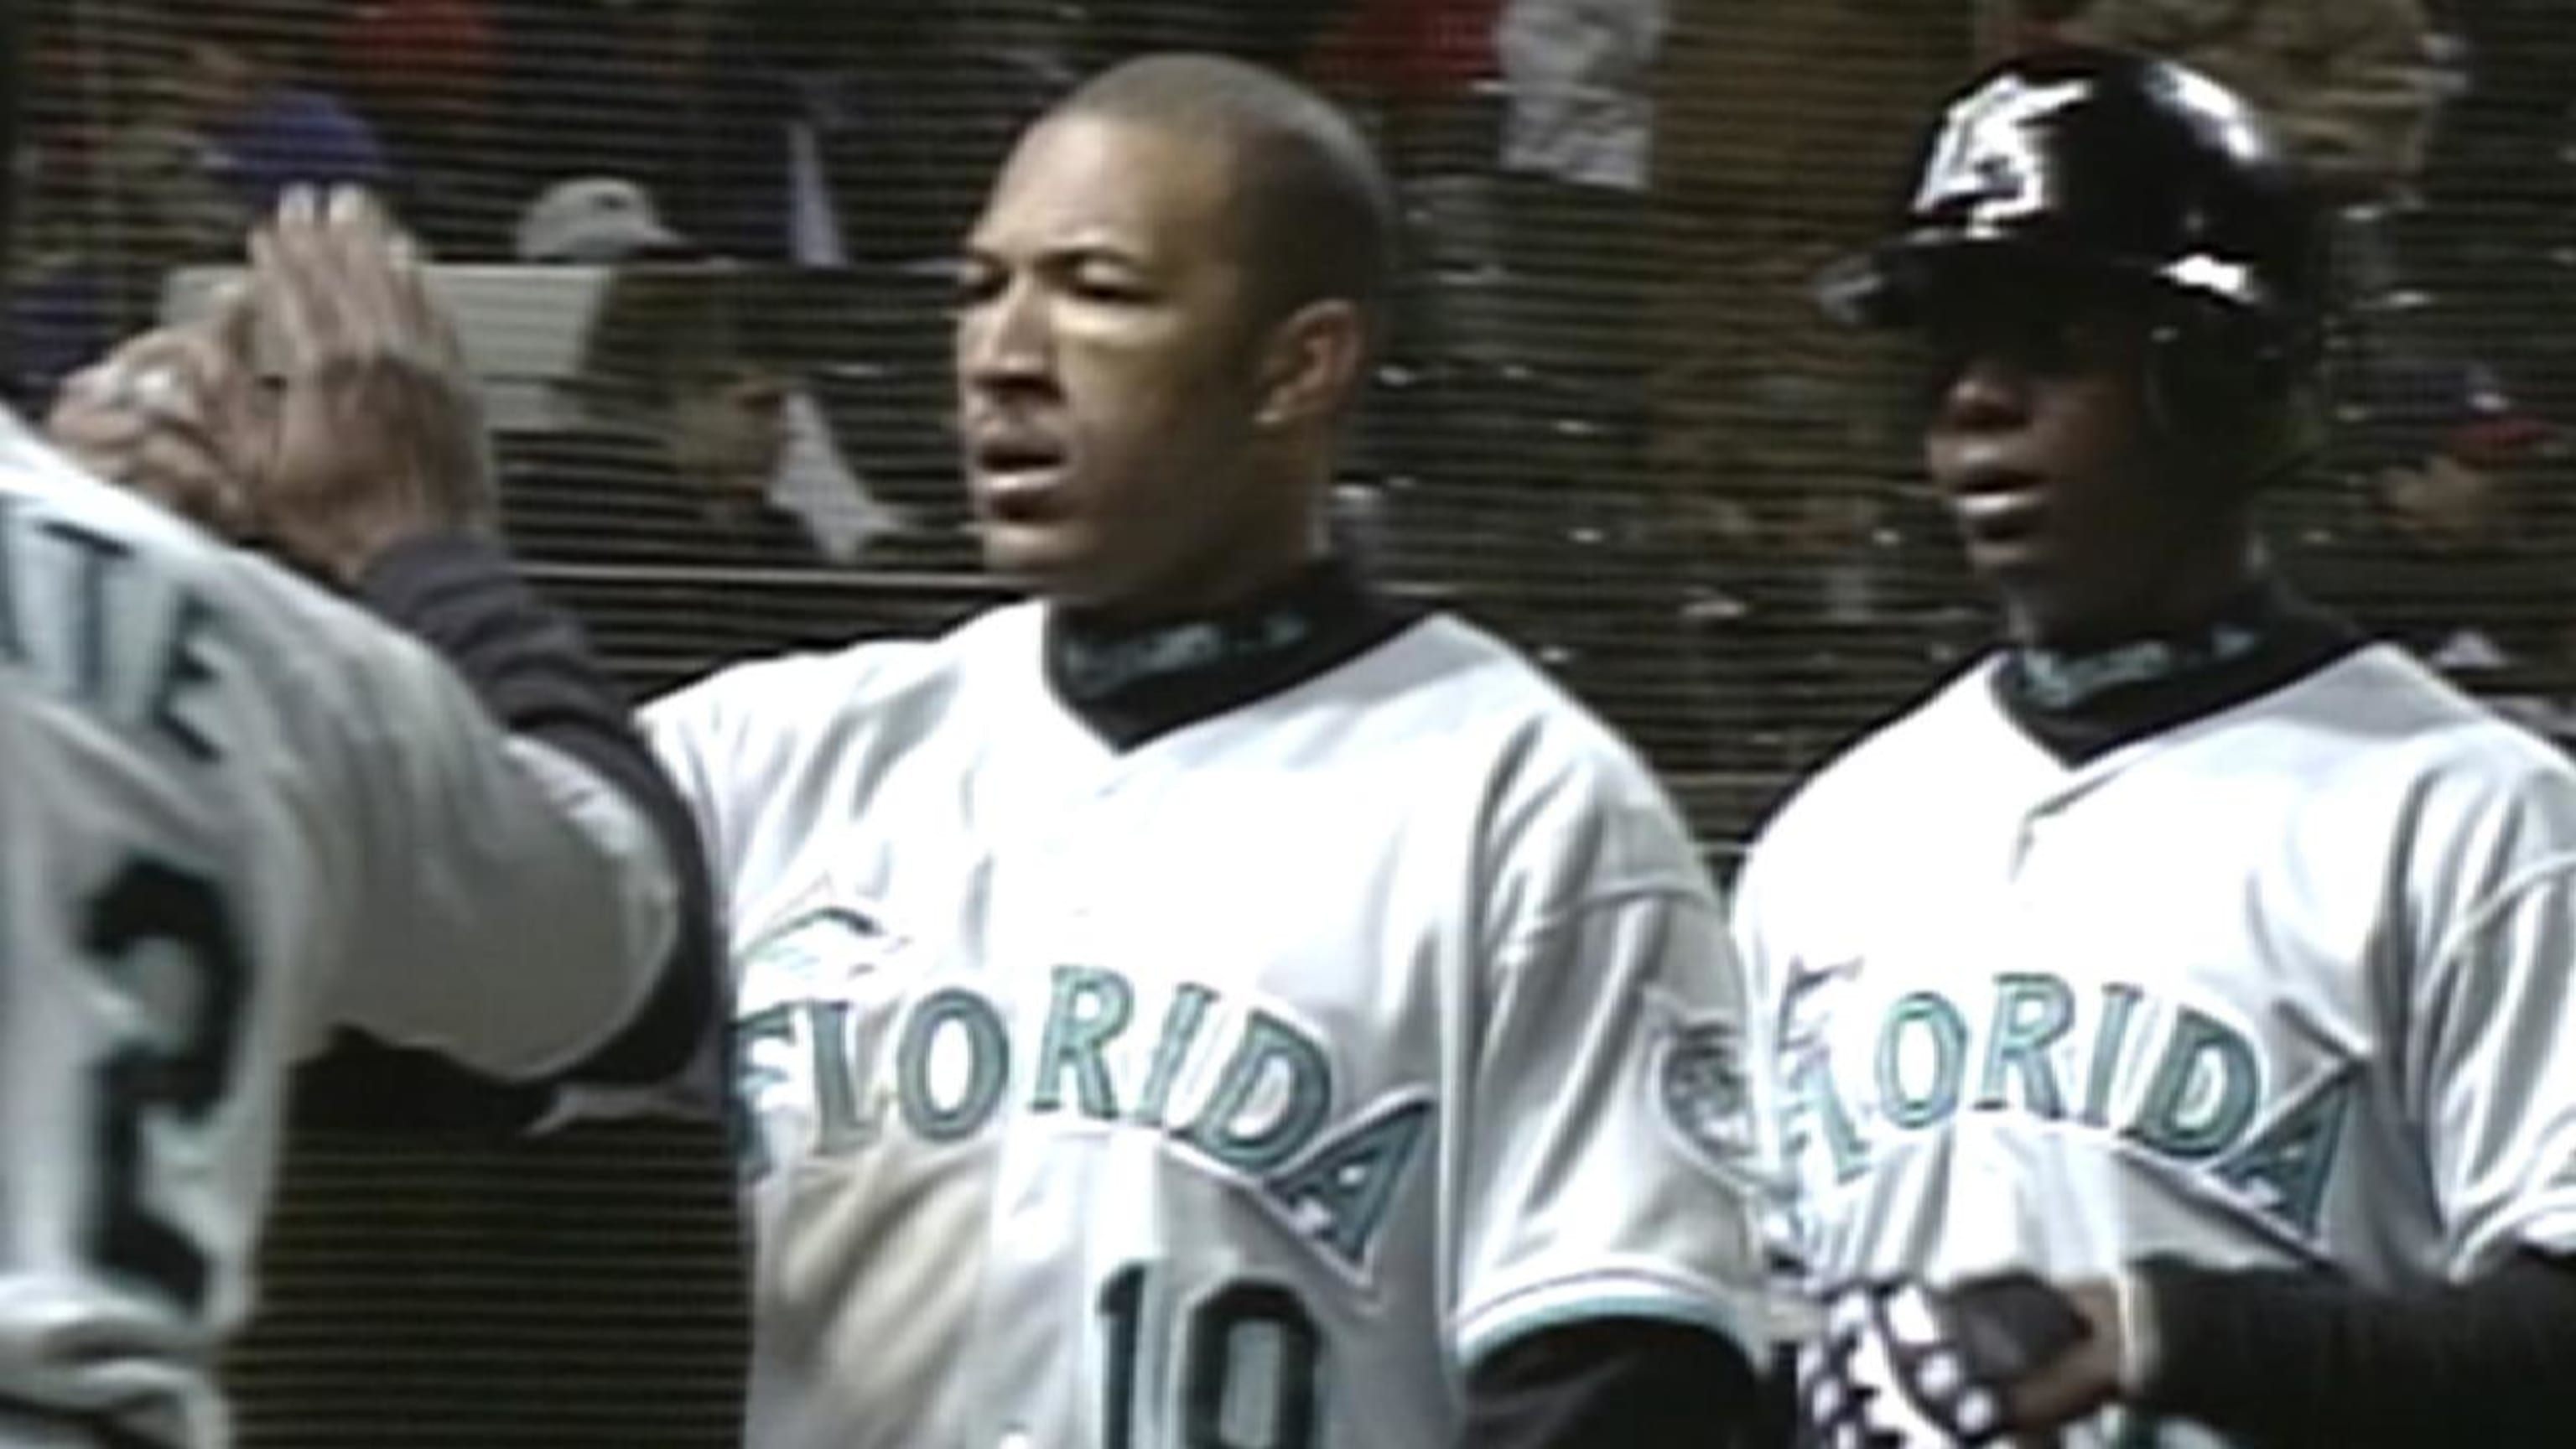 The 1997 World Series between Cleveland vs Marlins 25 years later